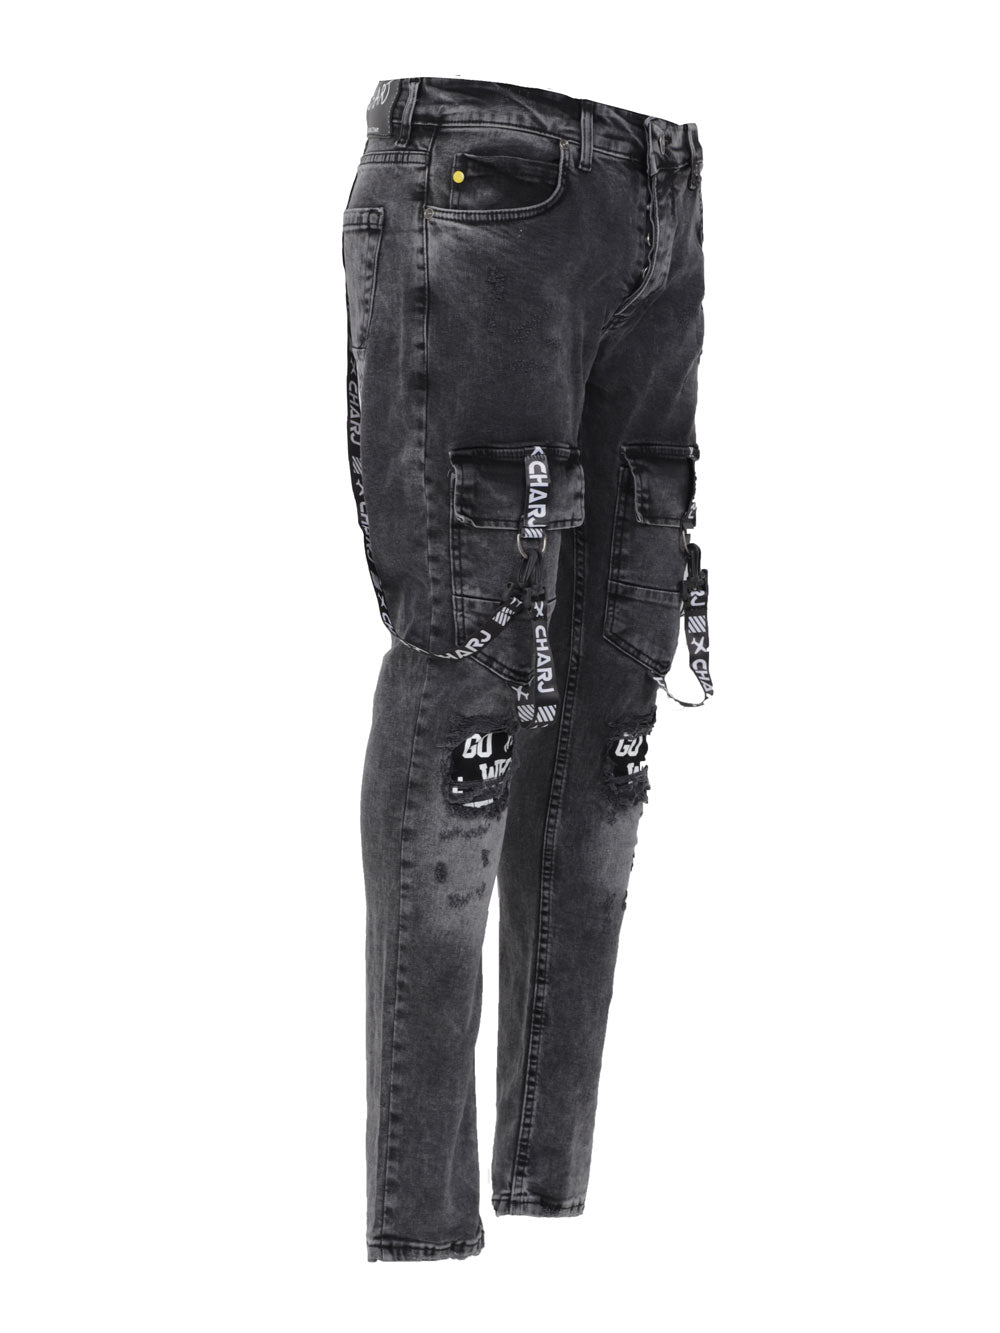 A pair of TORNADO BLACK jeans with zippers, patches, and an elastic fabric for a smooth feel.